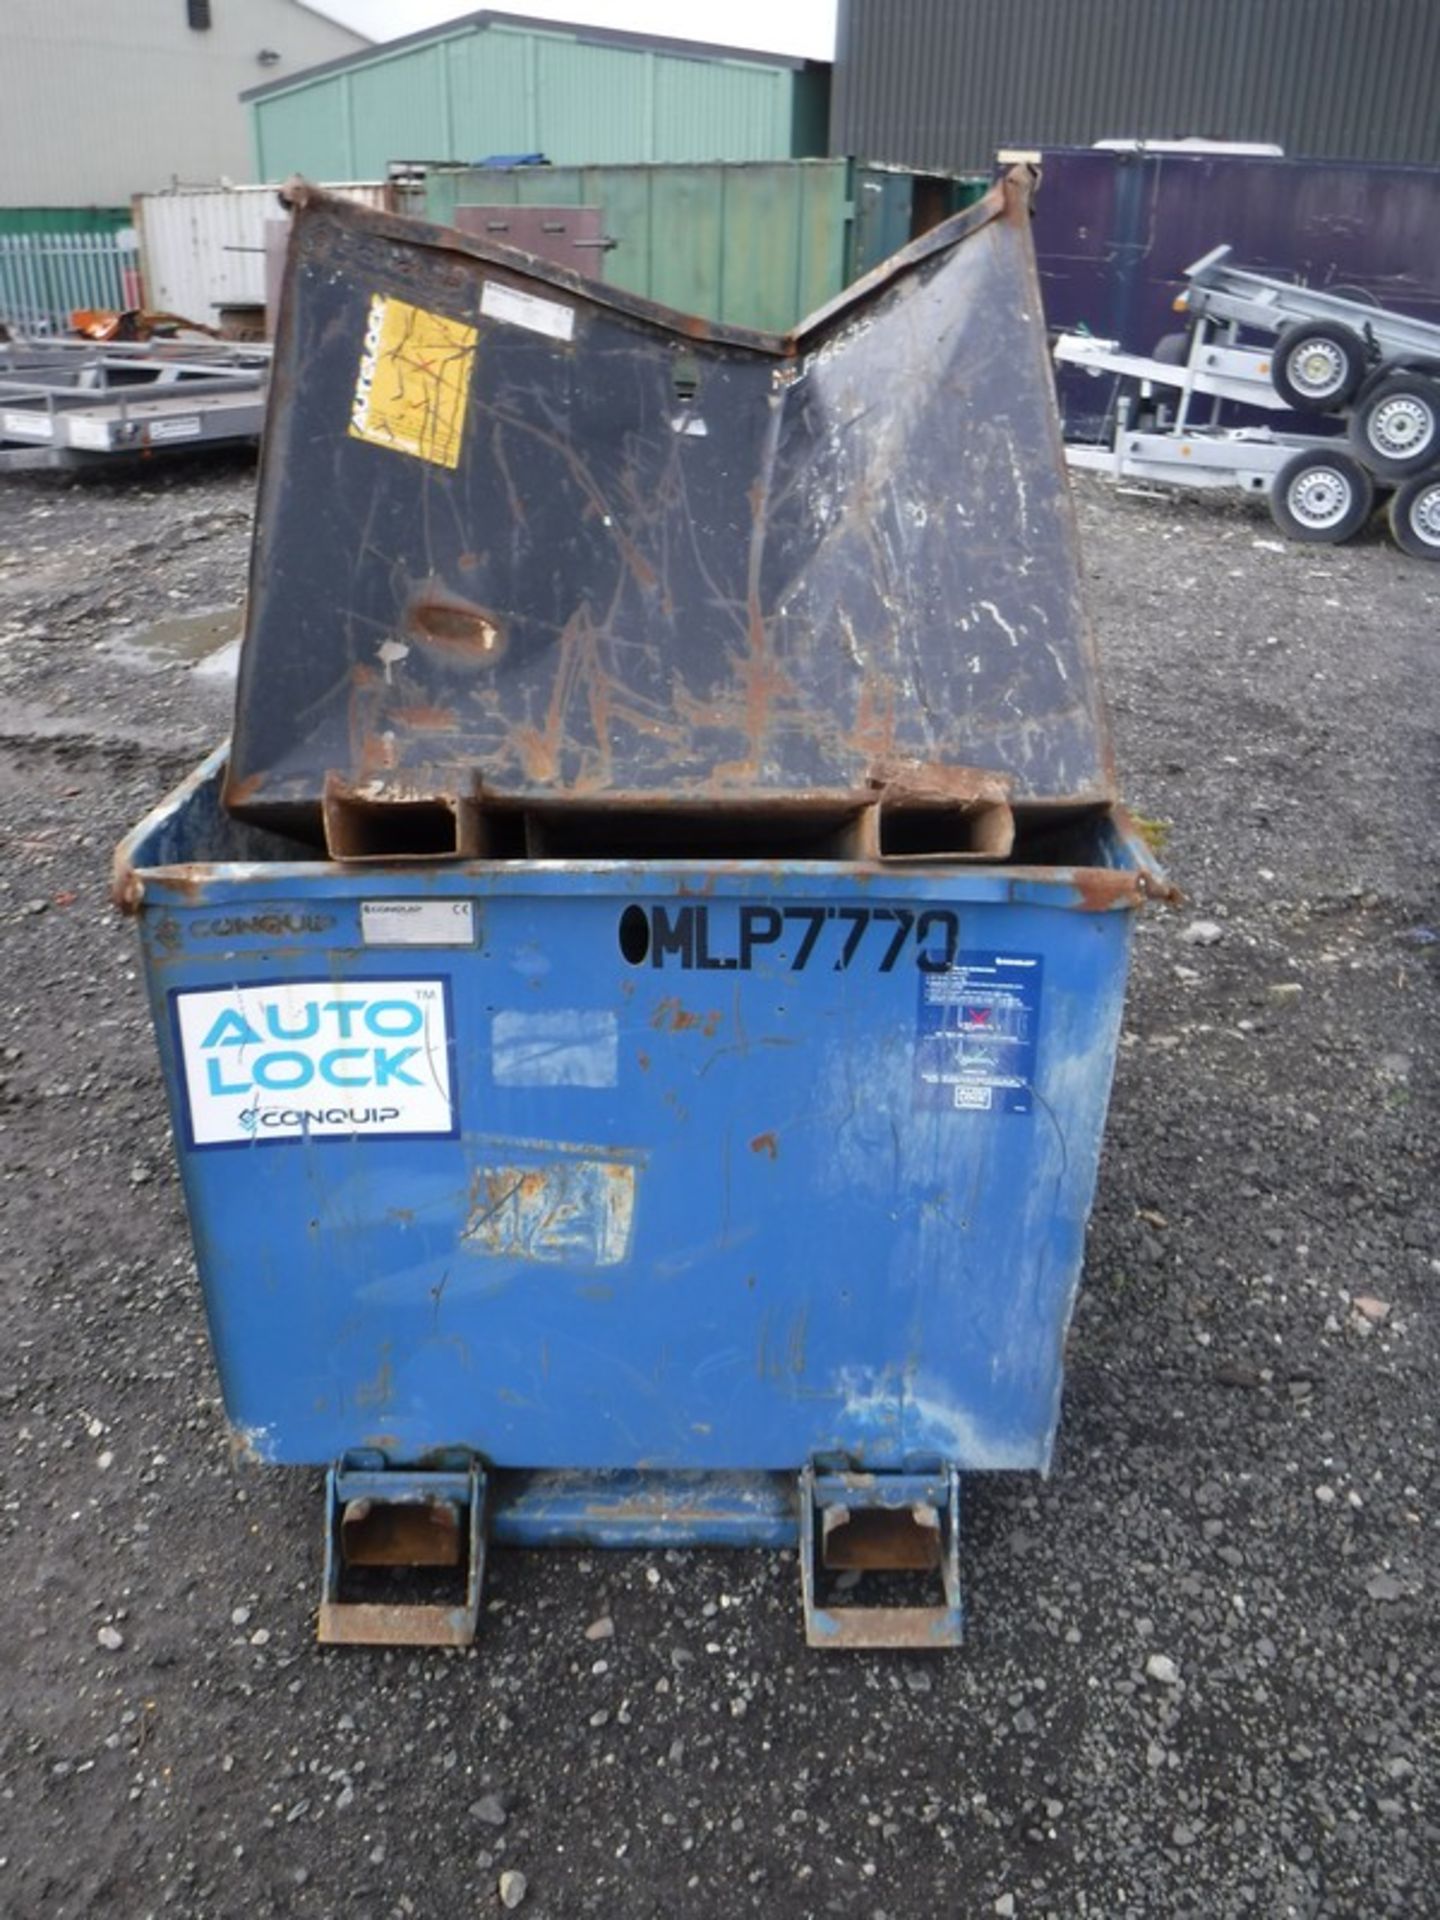 2016 & 2017 CONQUIP 1200ltr tipping skips S/N CQ62860 & CQ57230. Asset Nos 7770 & 6693 - Image 4 of 6